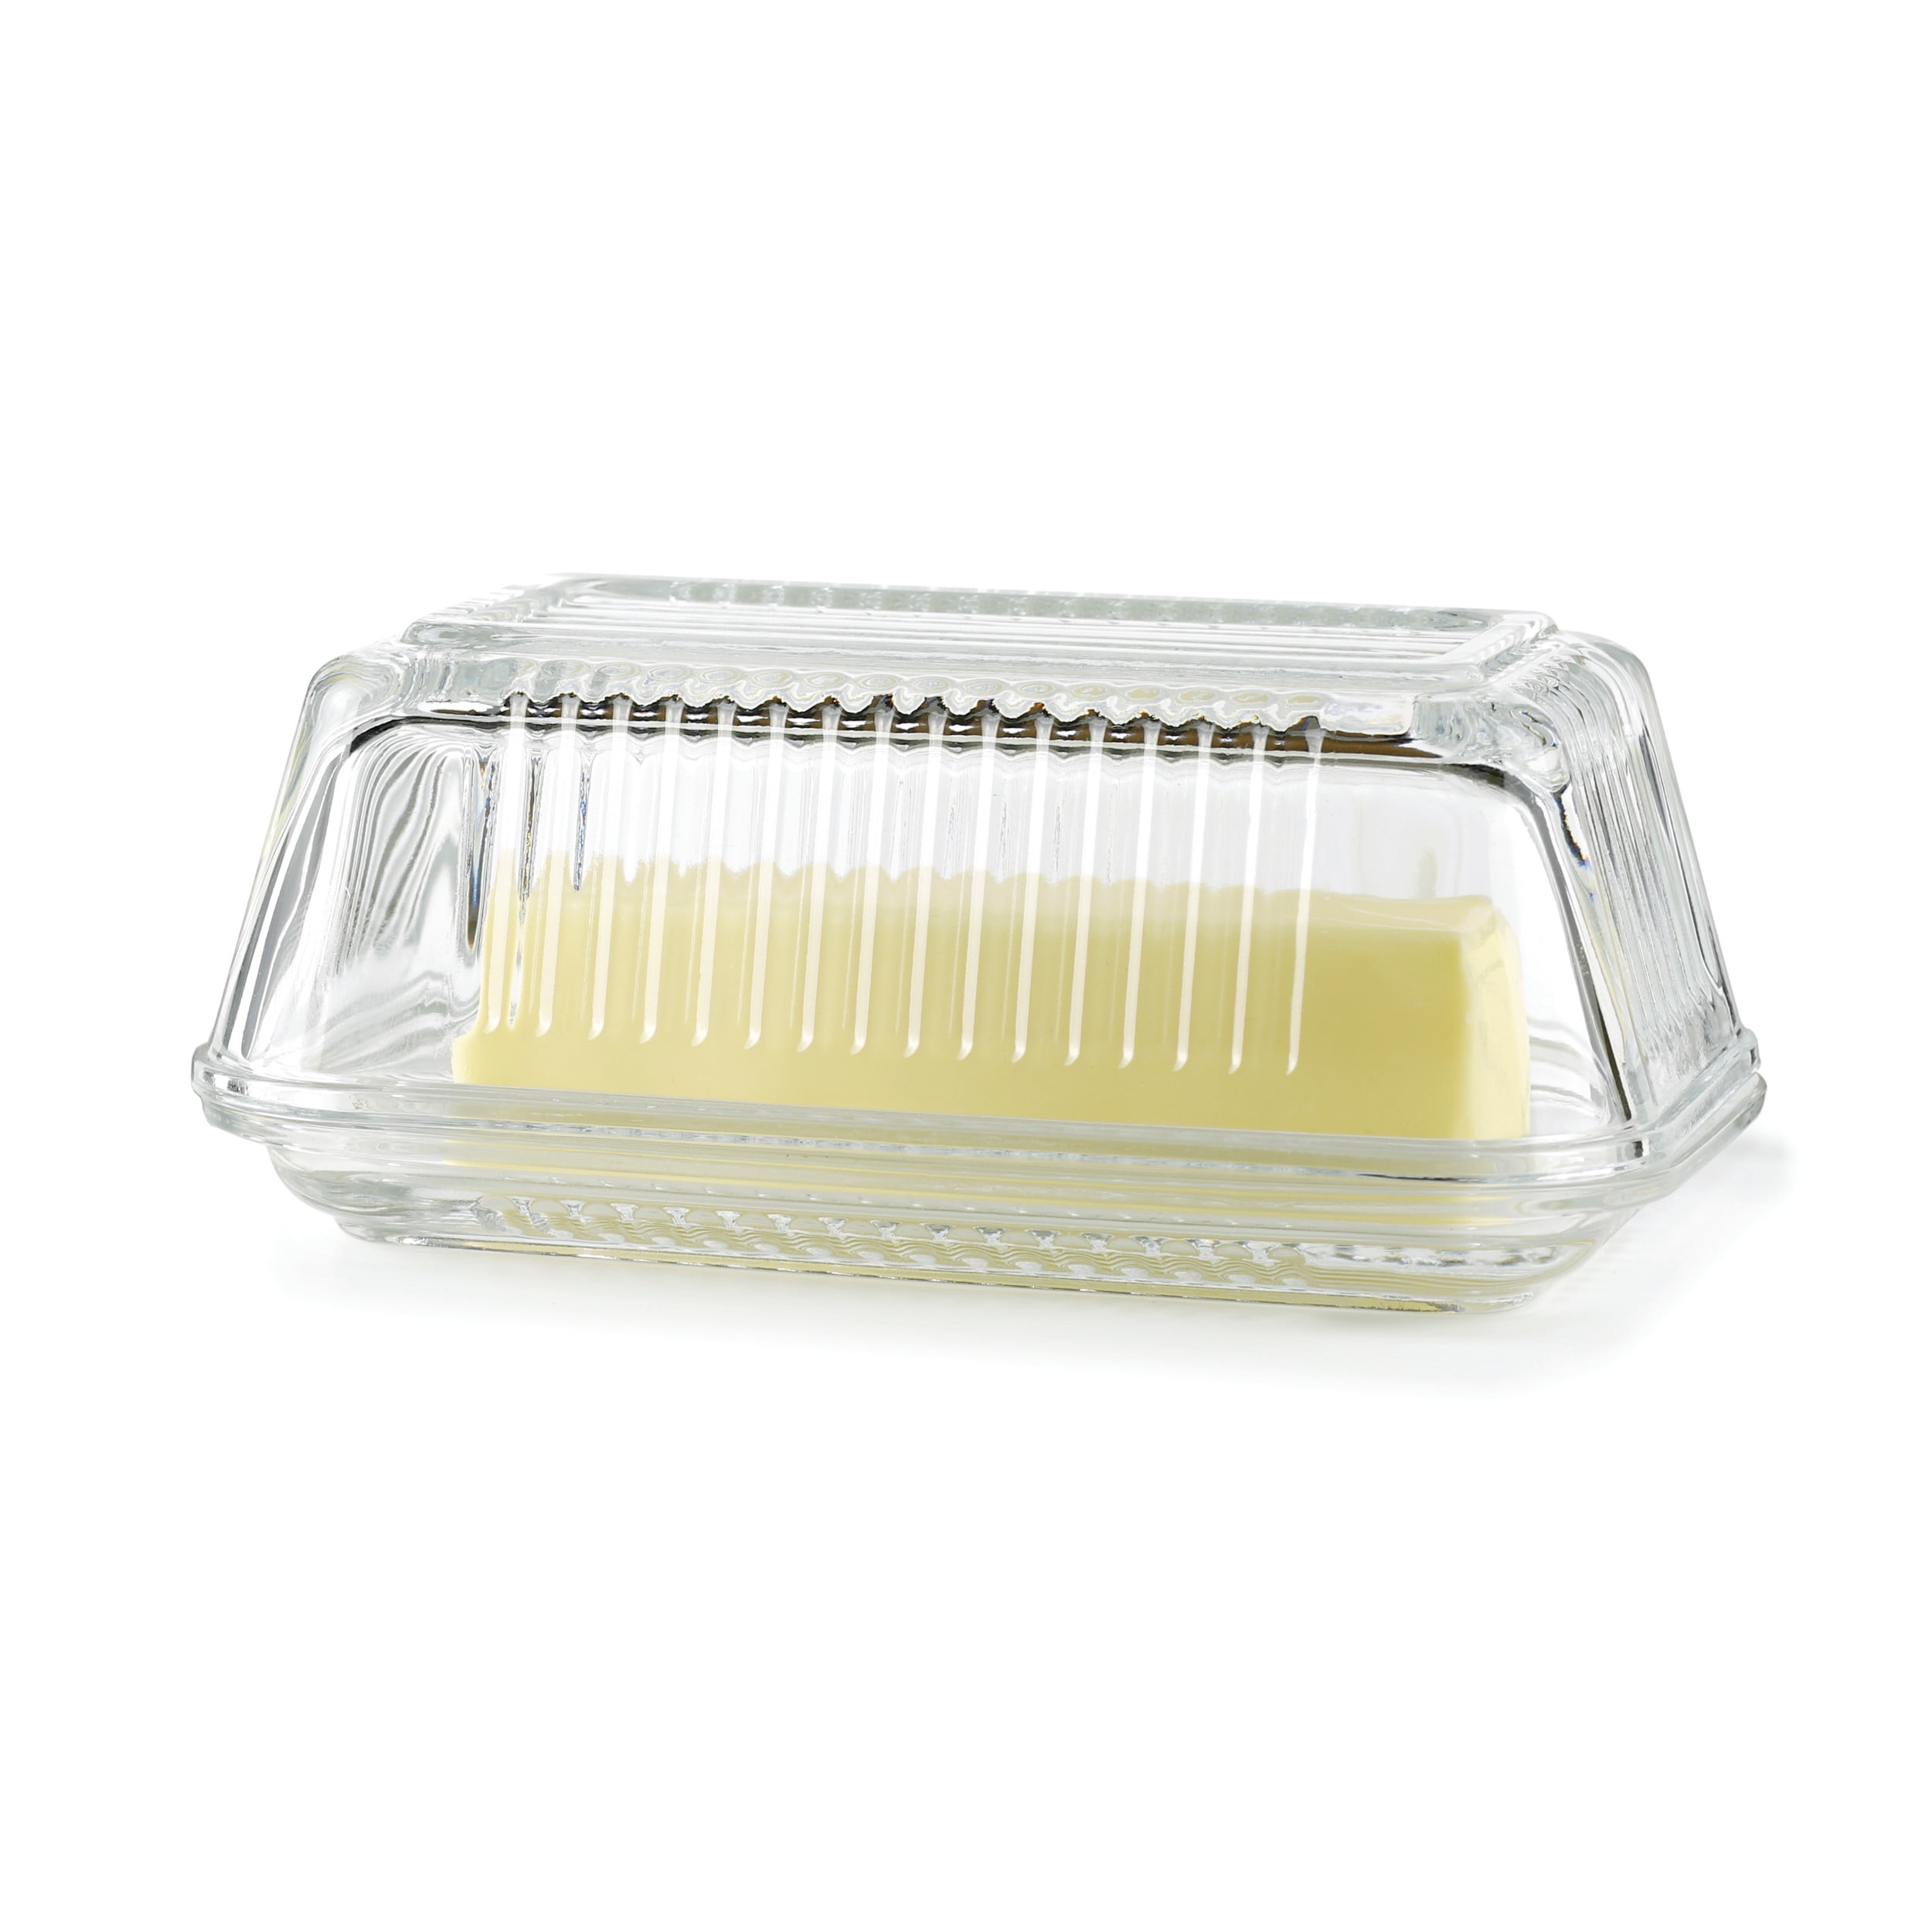 Picture of Circleware 66710 Circleware Farm Covered Butter Dish 4.25x2.25x2.75